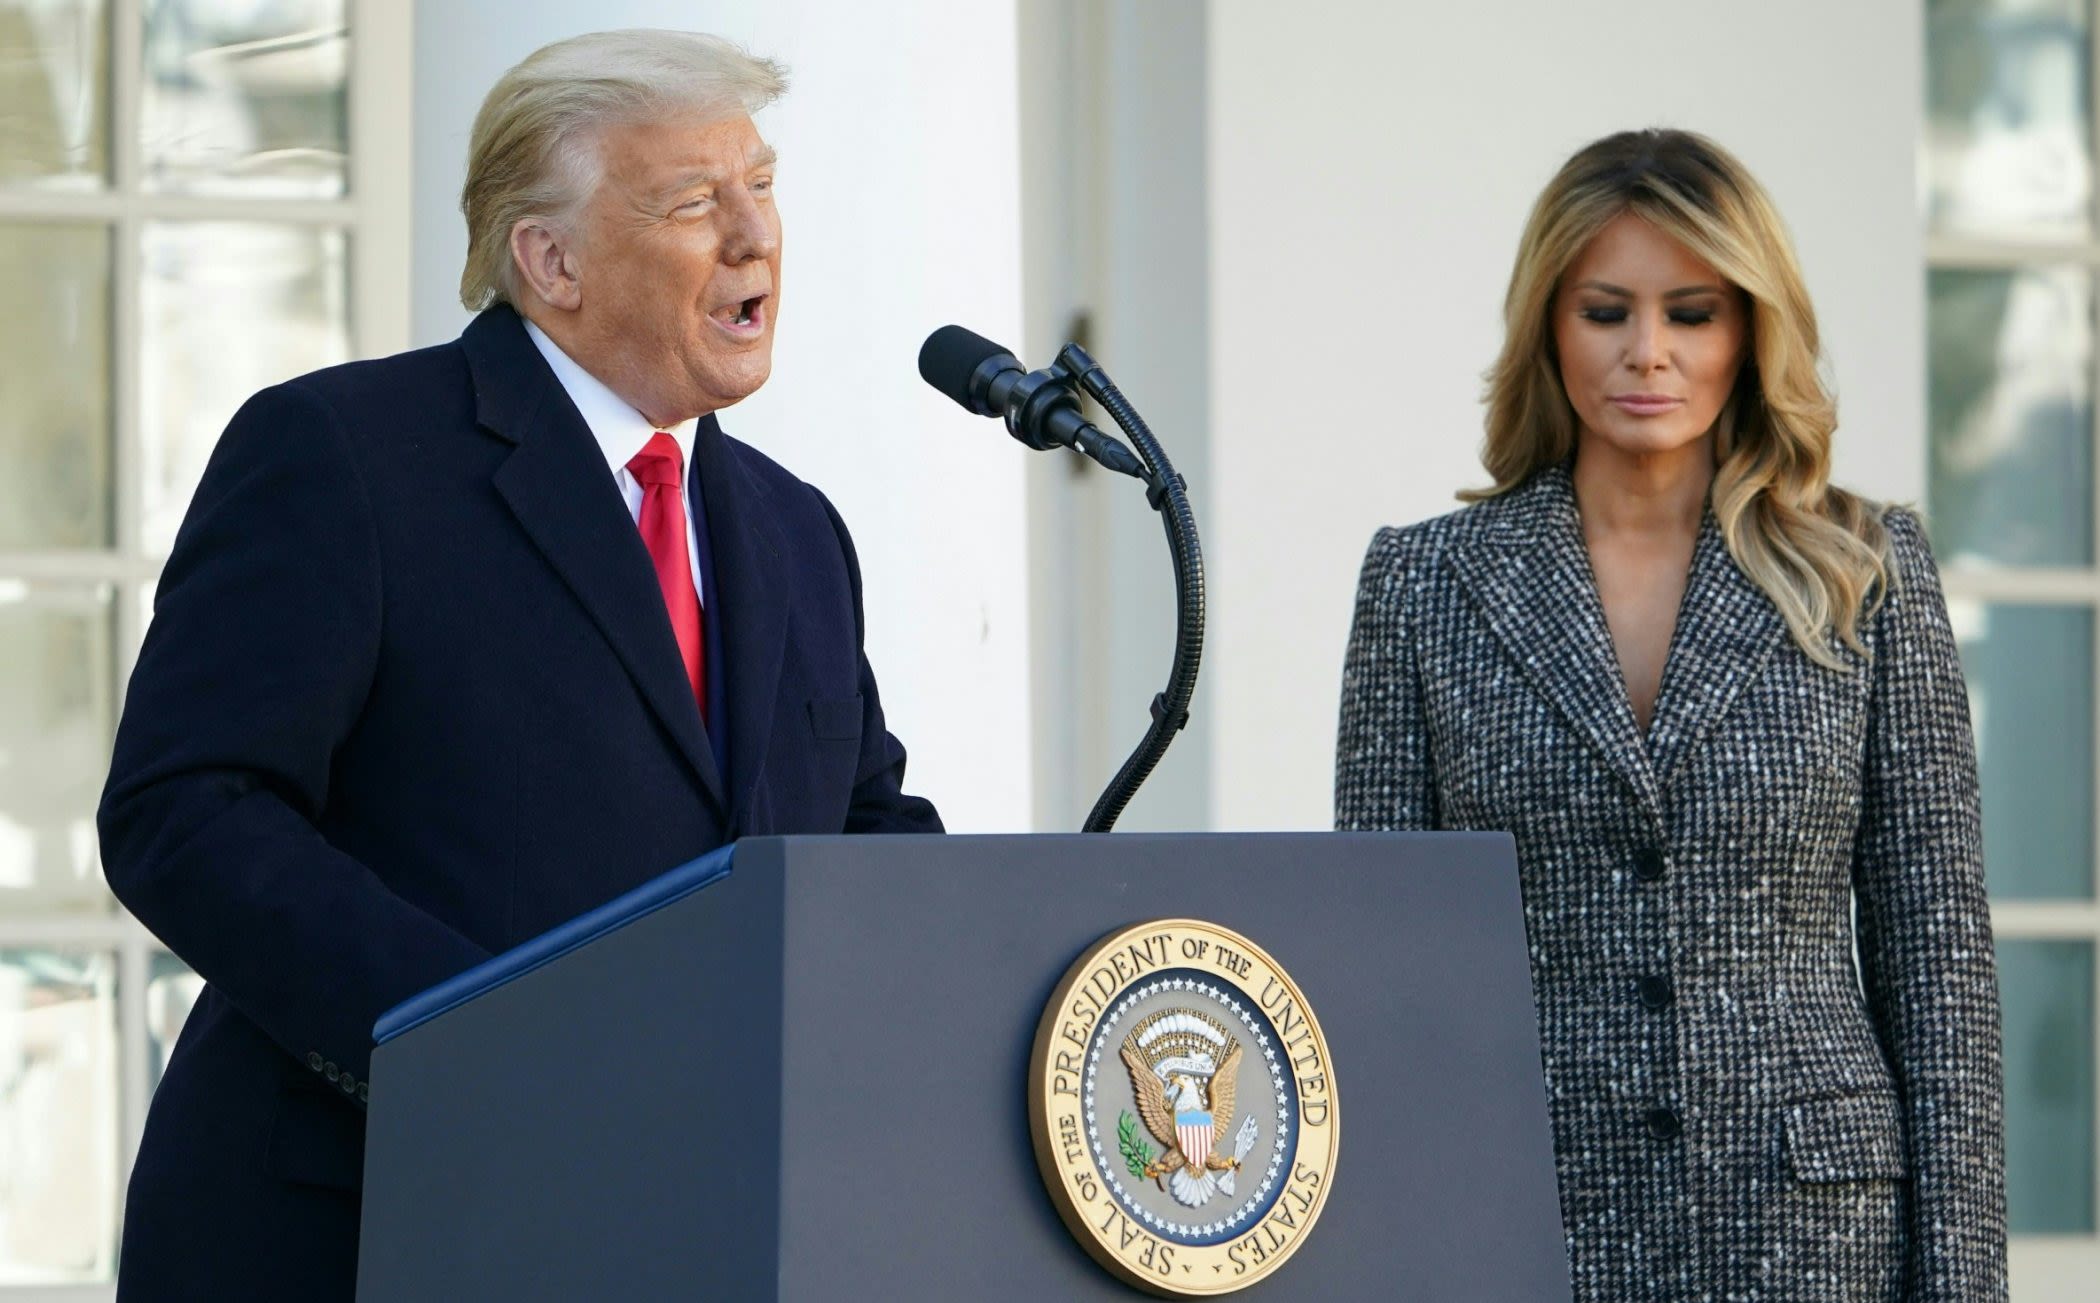 Why Melania Trump is distancing herself from her husband